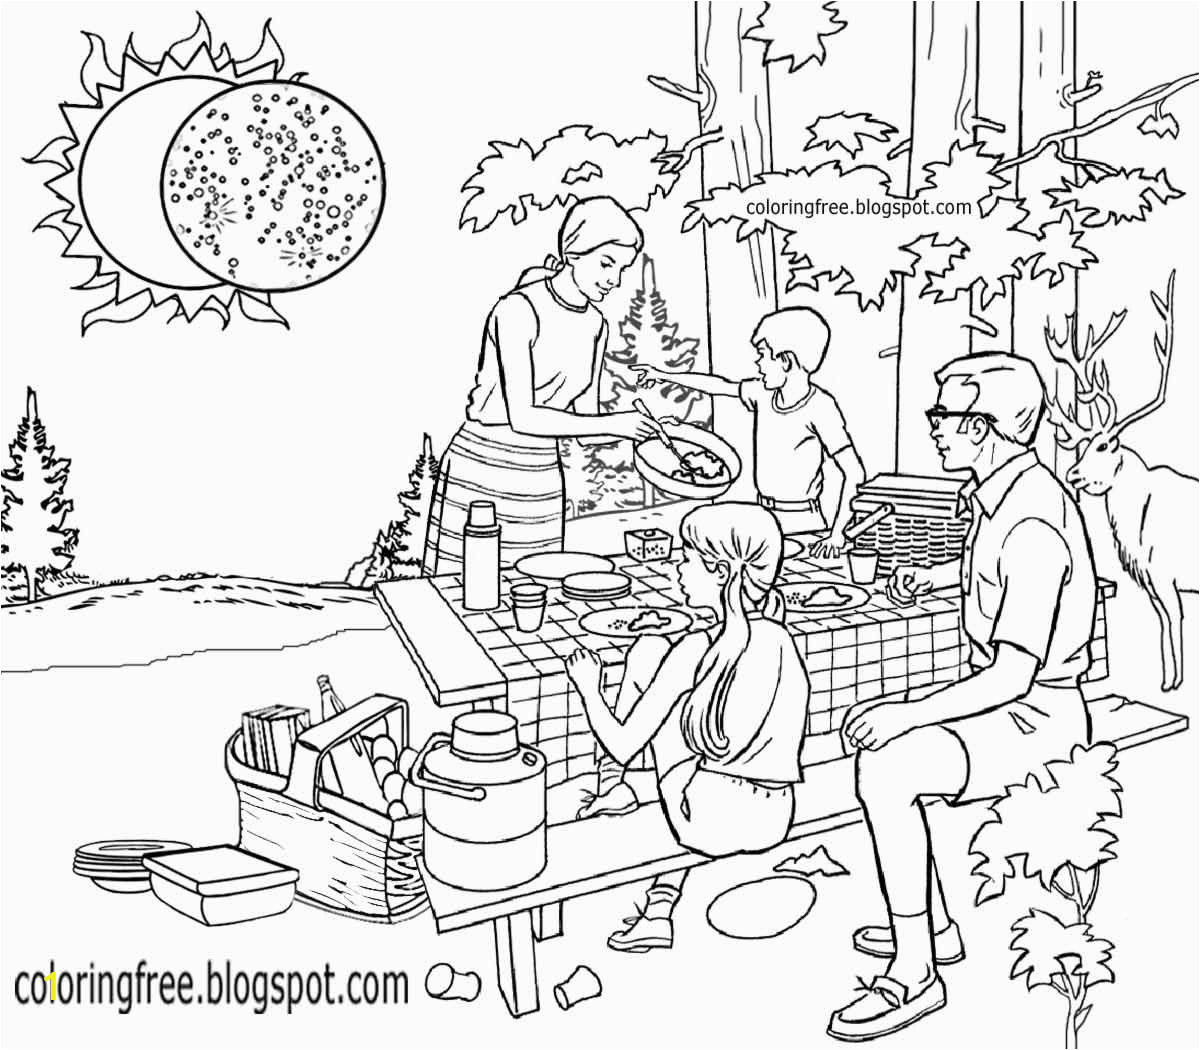 Coloring Pages for solar Eclipse the Best Free Eclipse Drawing Images Download From 235 Free